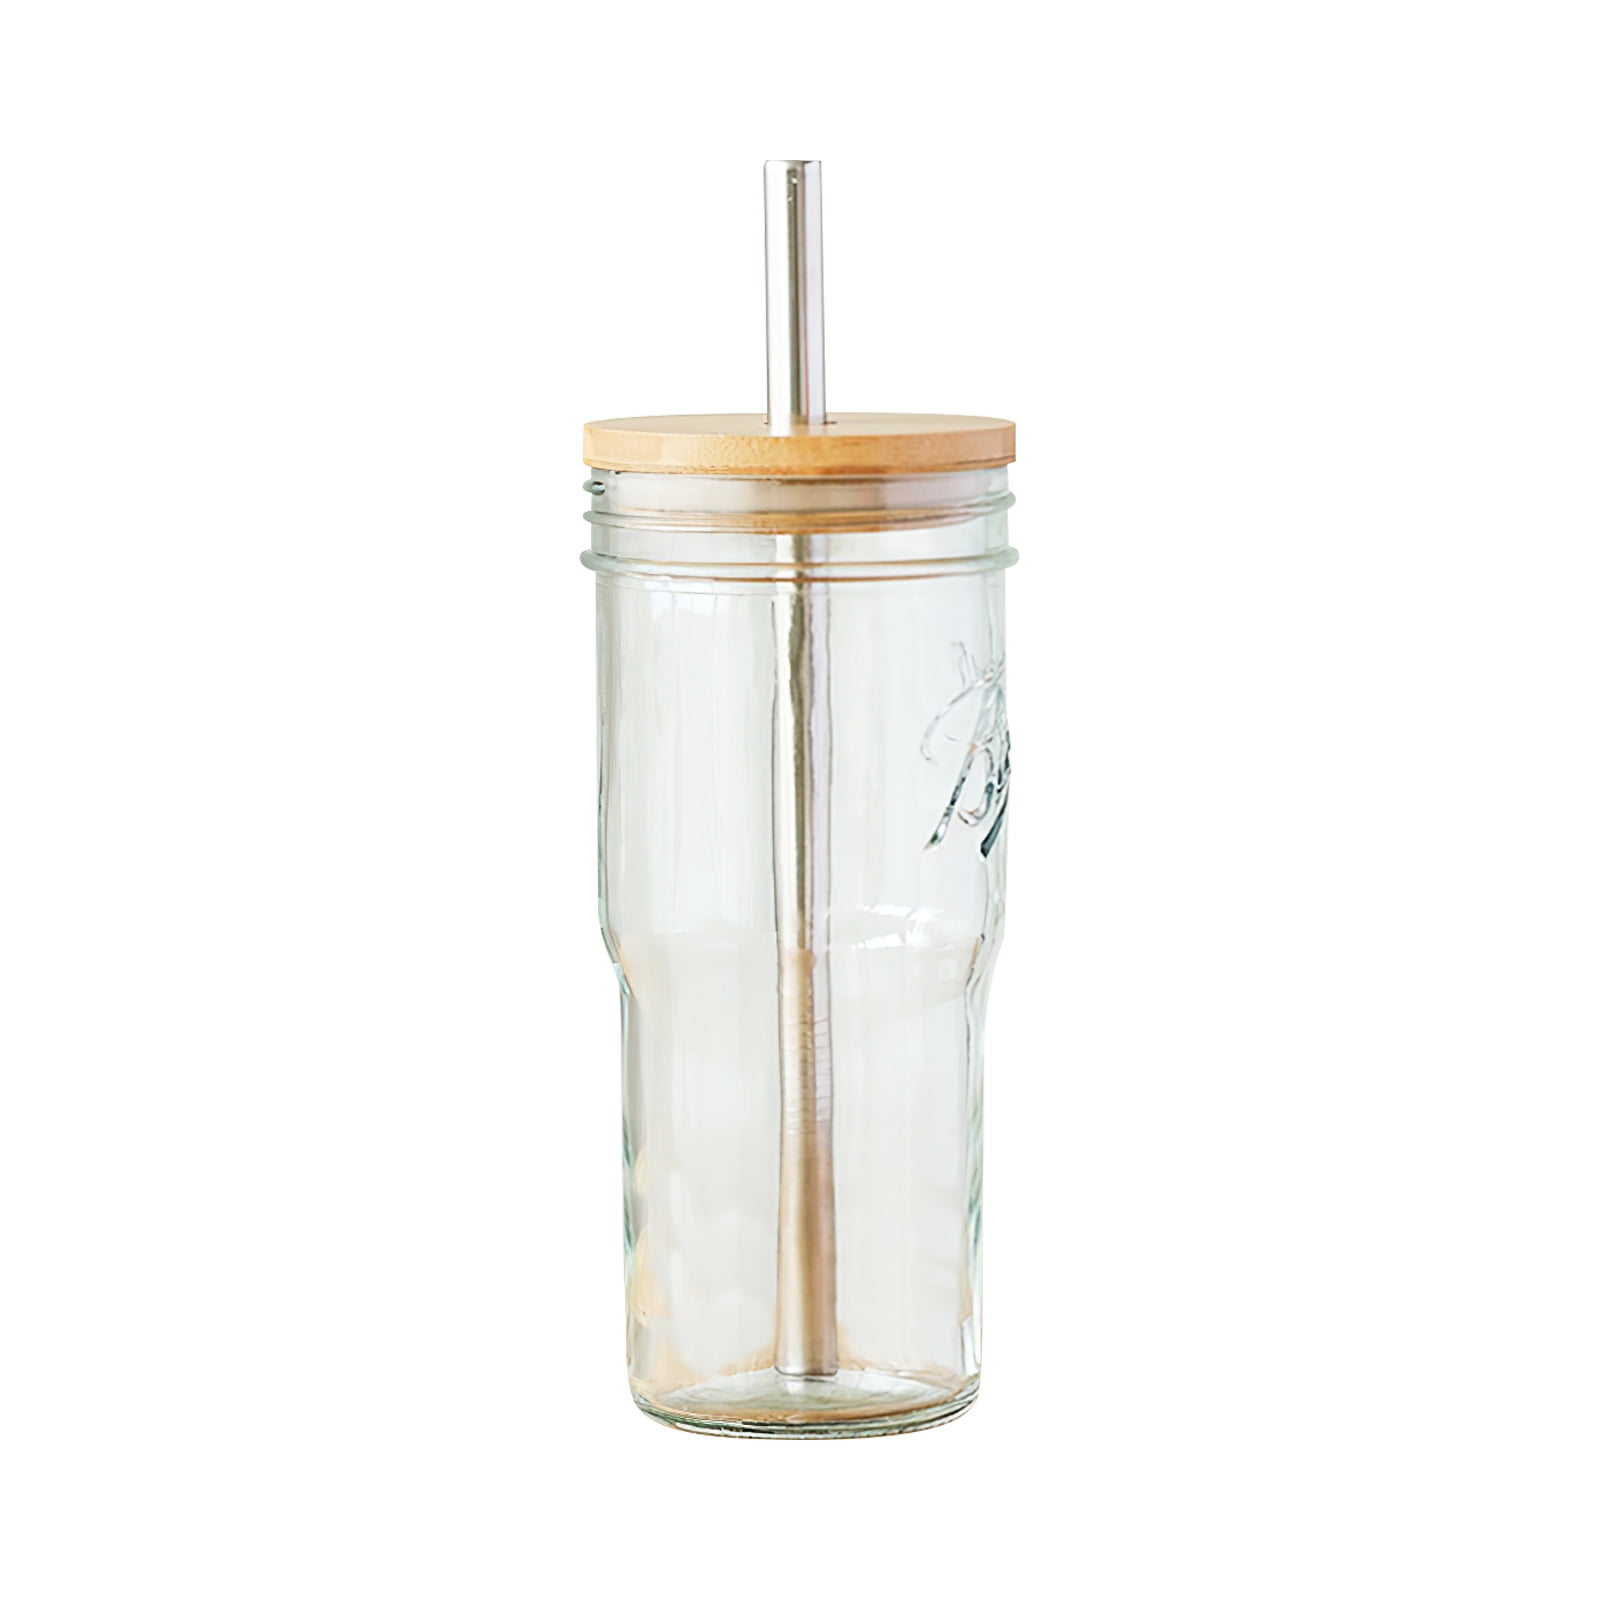 4-Pack 24oz Glass Tumbler Cups with Handle, Bamboo Lids, and Straws -  Reusable Mason Jar Drinking Gl…See more 4-Pack 24oz Glass Tumbler Cups with